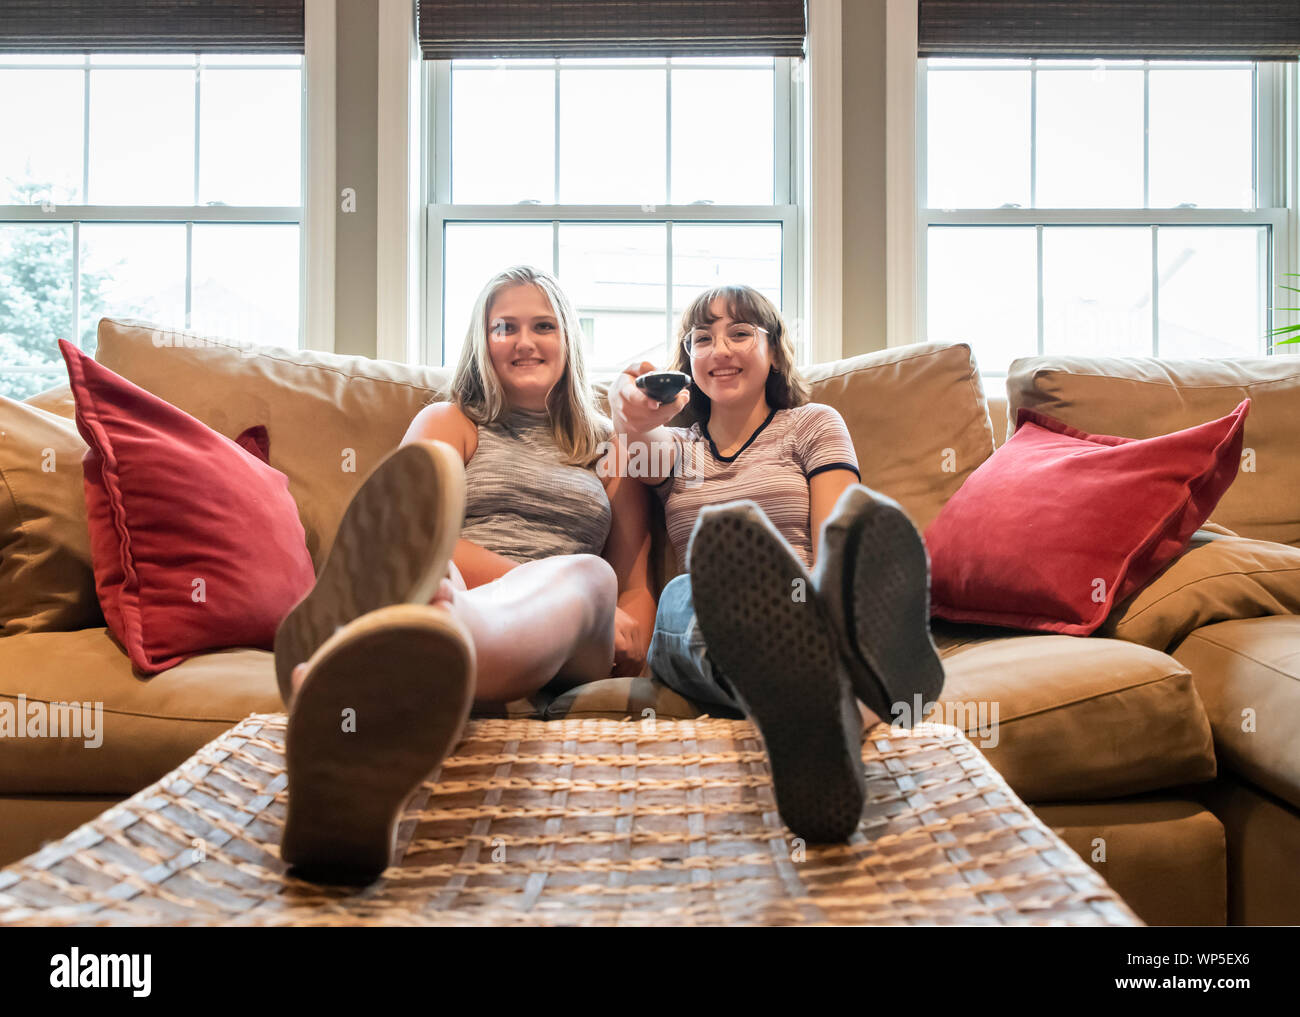 Two teenage girls sitting on couch with feet up watching tv together. Stock Photo